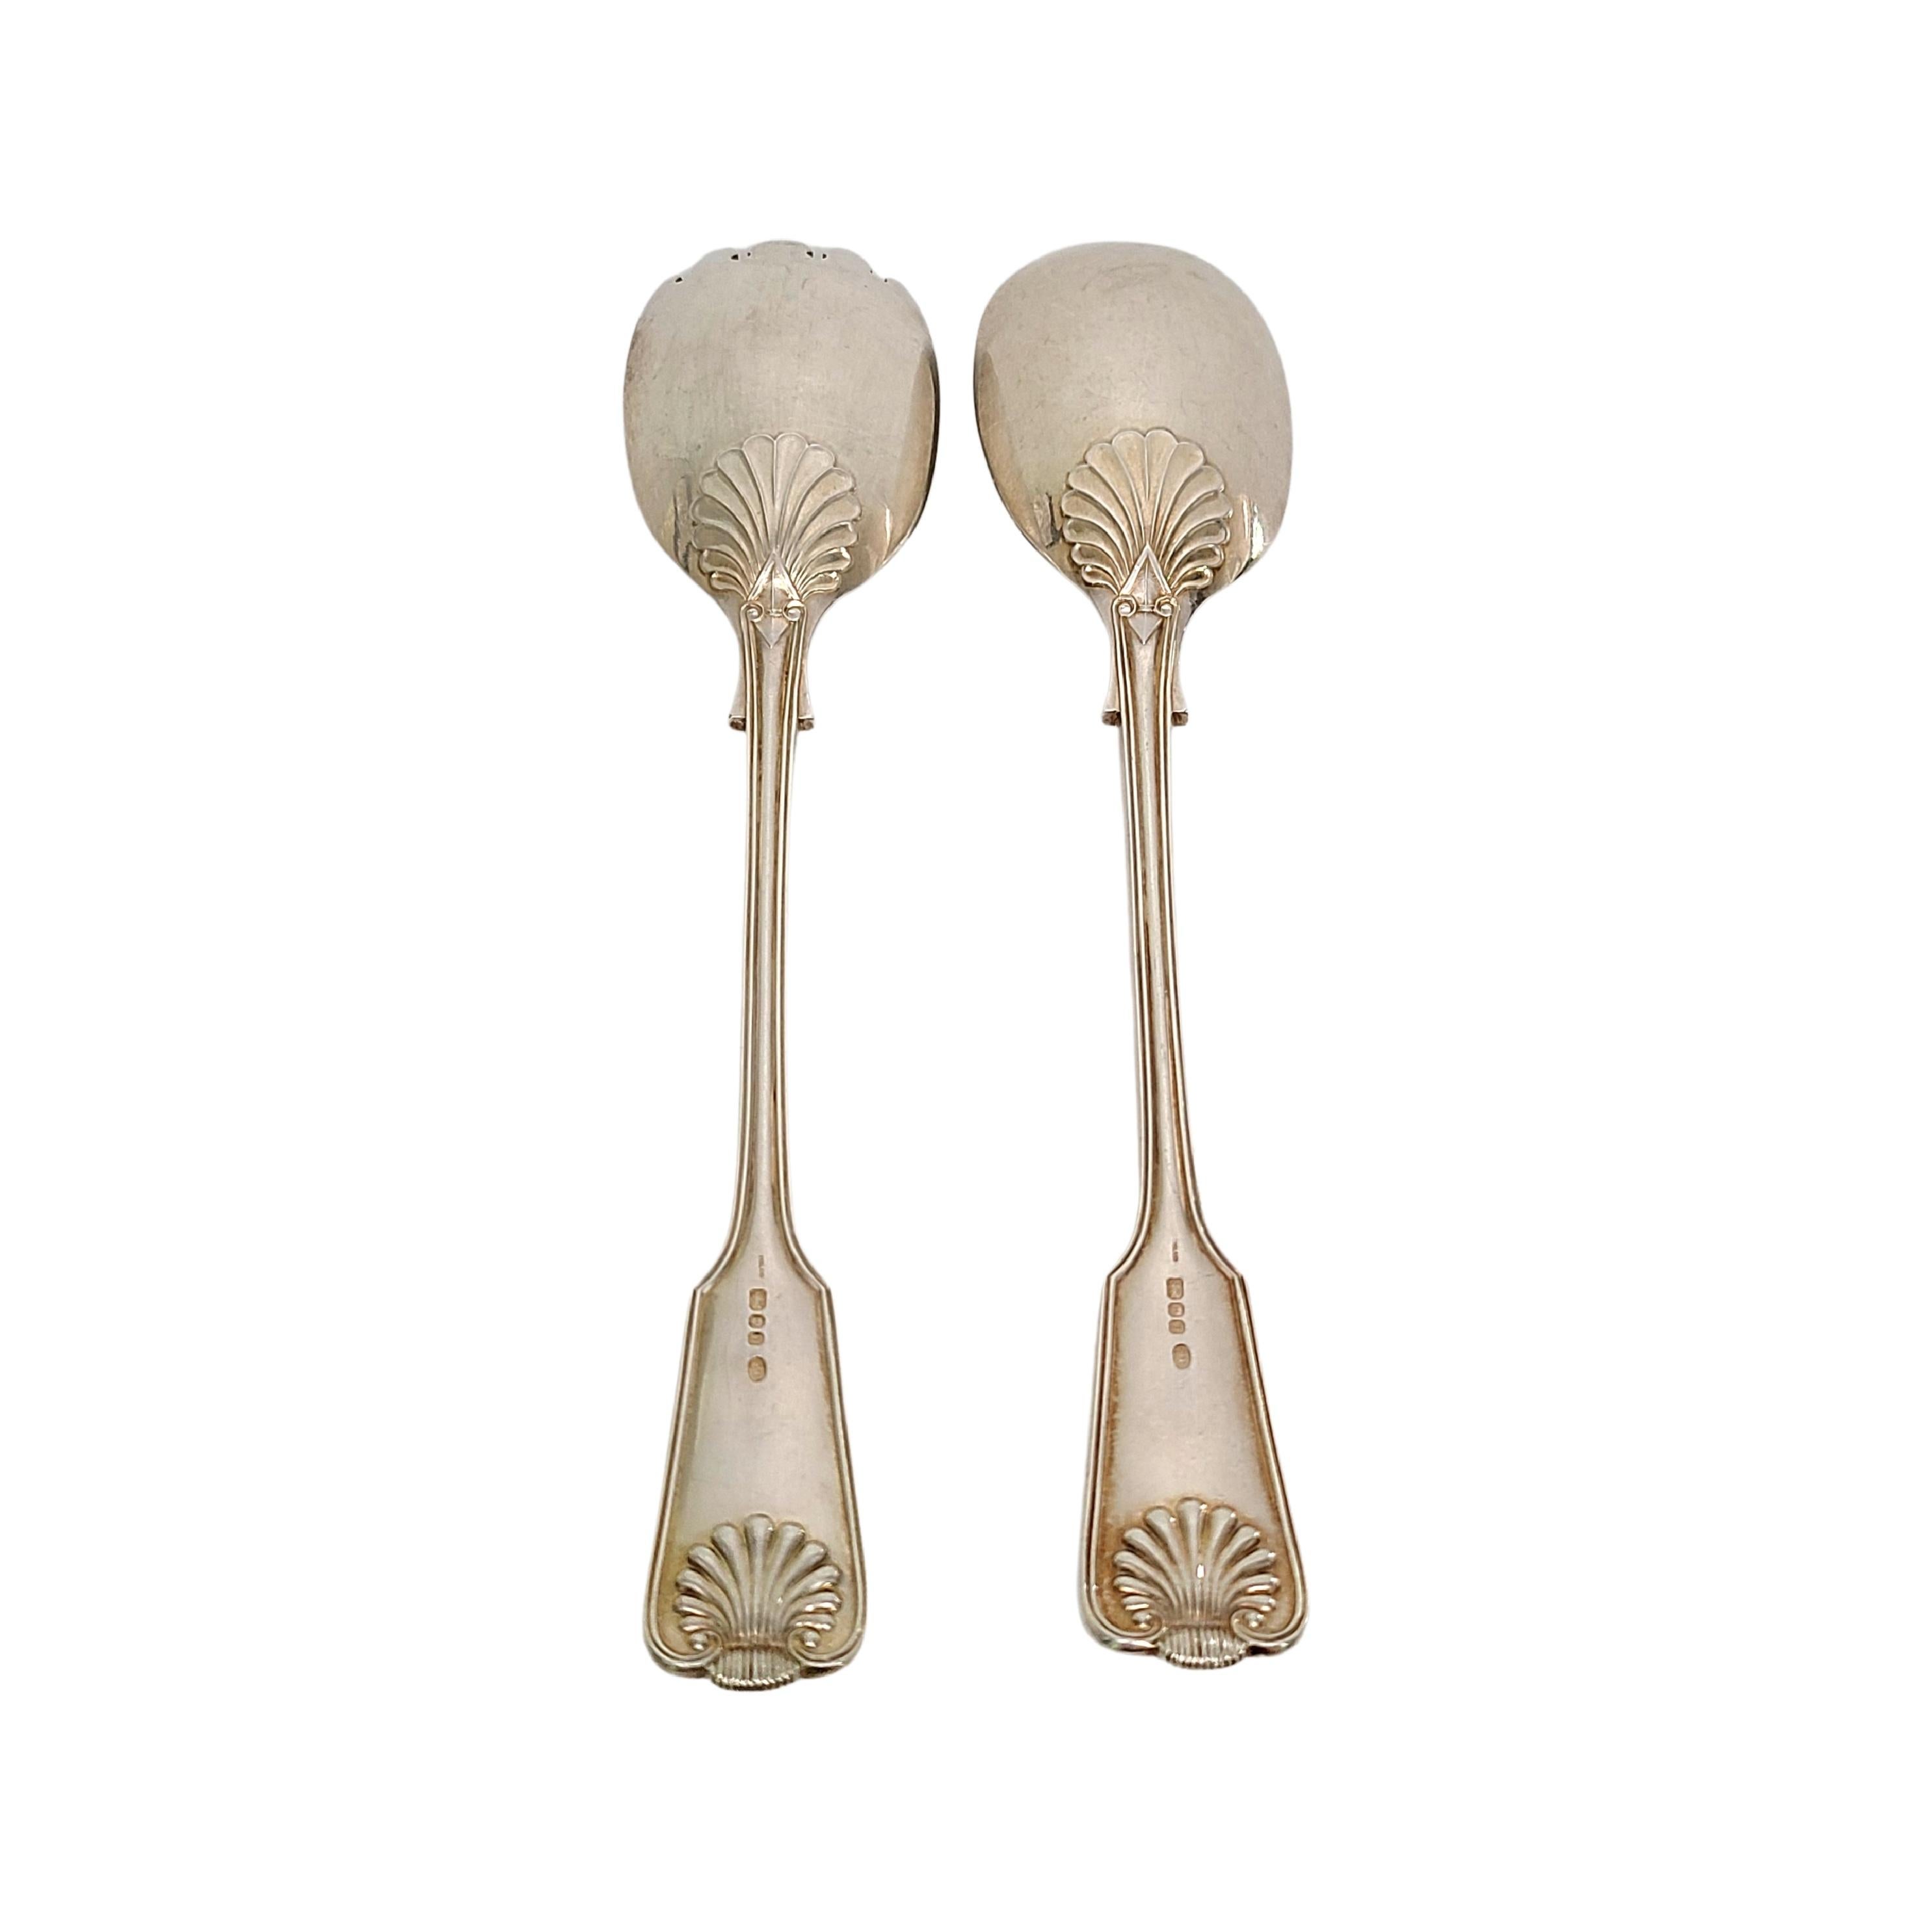 Sterling silver 2pc salad serving set in the Fiddle Thread & Shell pattern by James Robinson of London, England, circa 1978.

No monogram.

Beautifully and timeless design, this salad serving set including a fork and a spoon. A shell adorn both